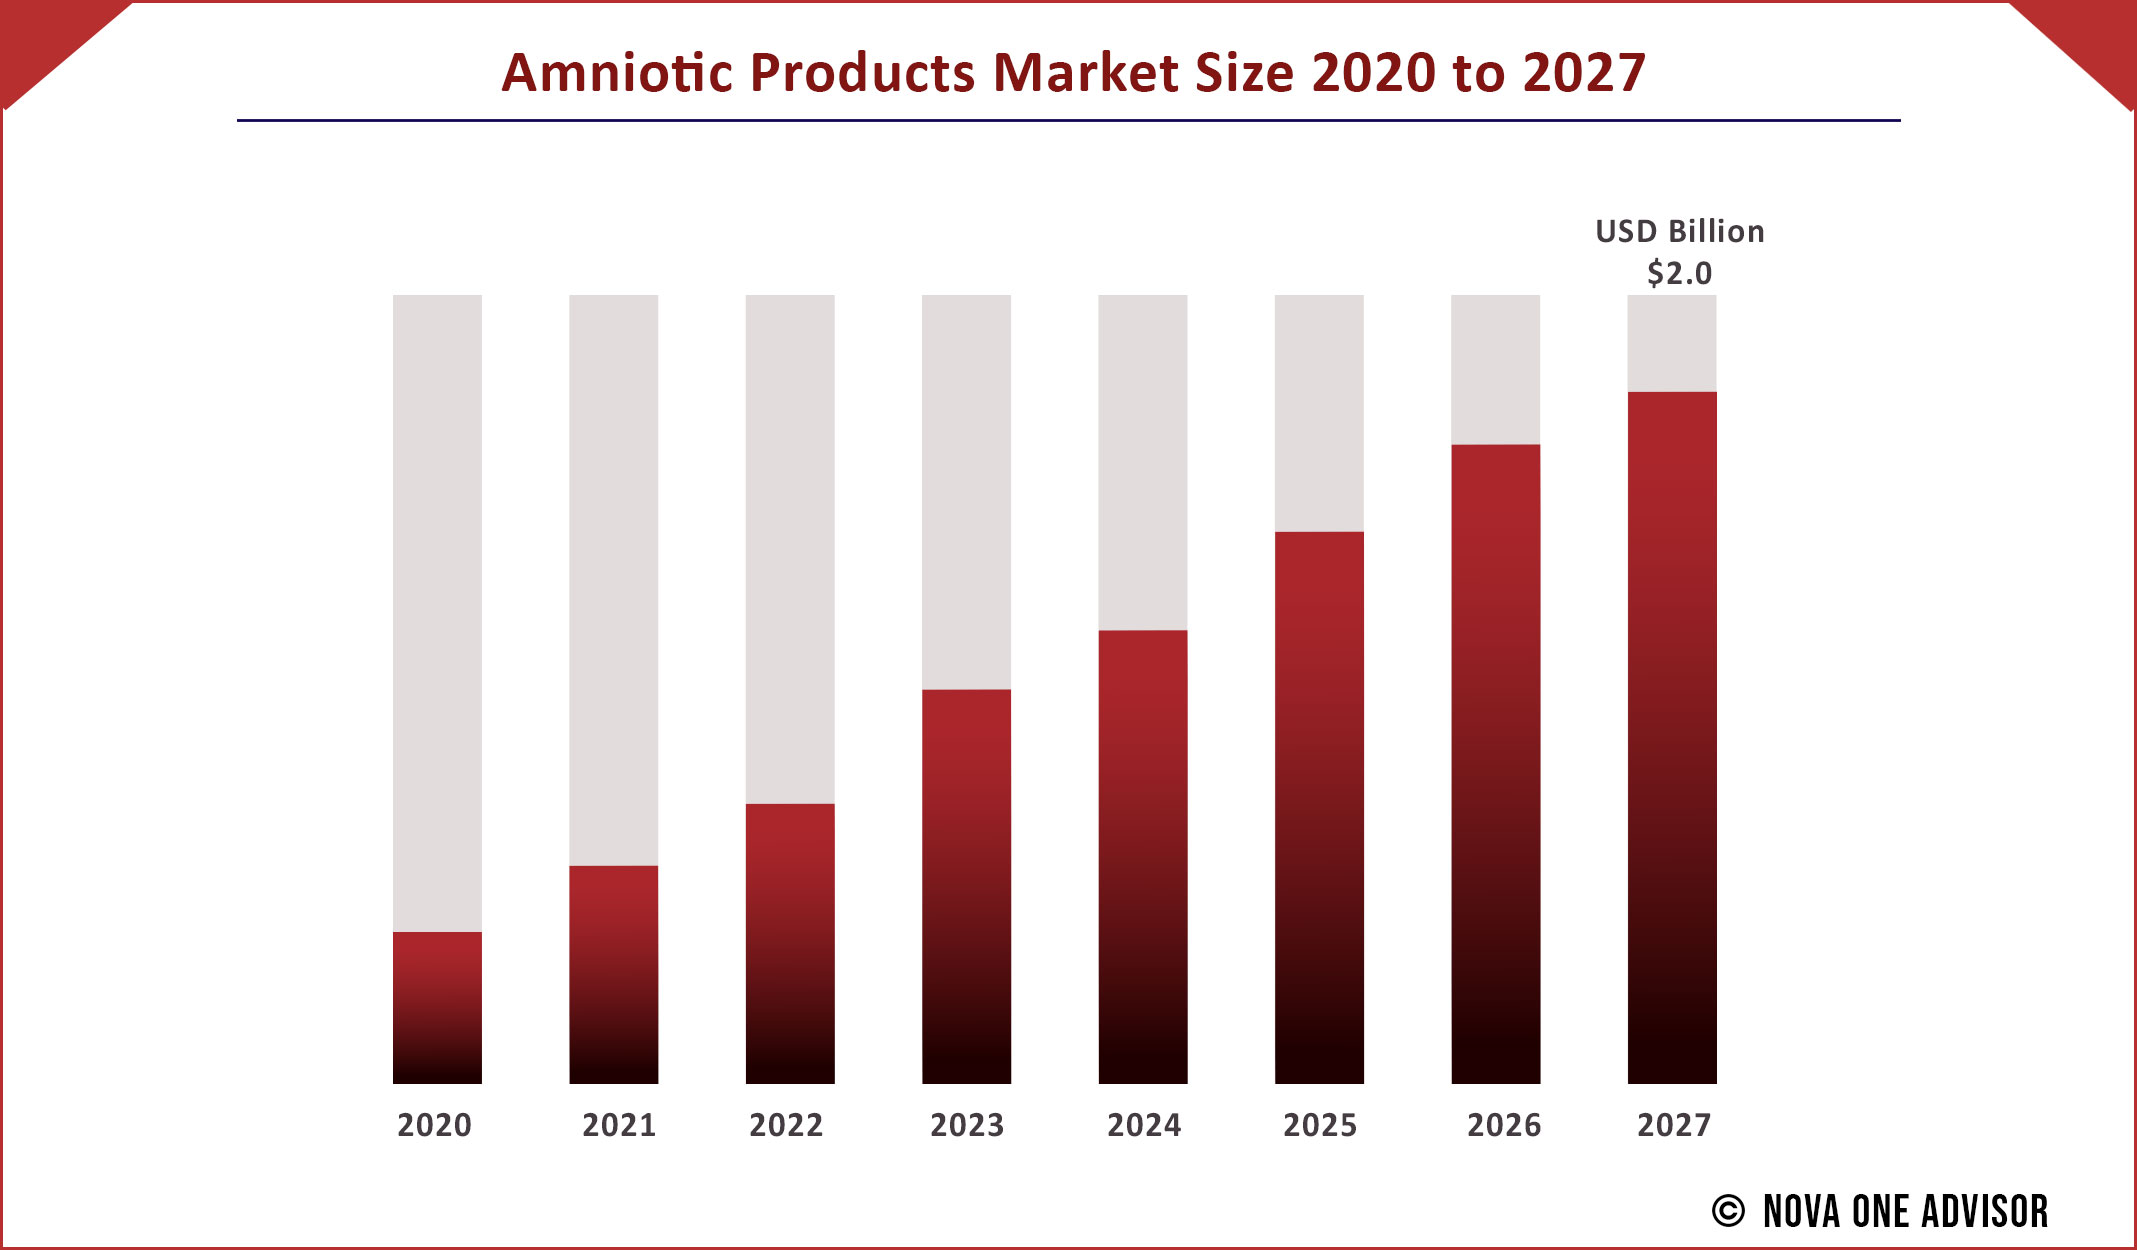 Amniotic Products Market Size 2020 to 2027